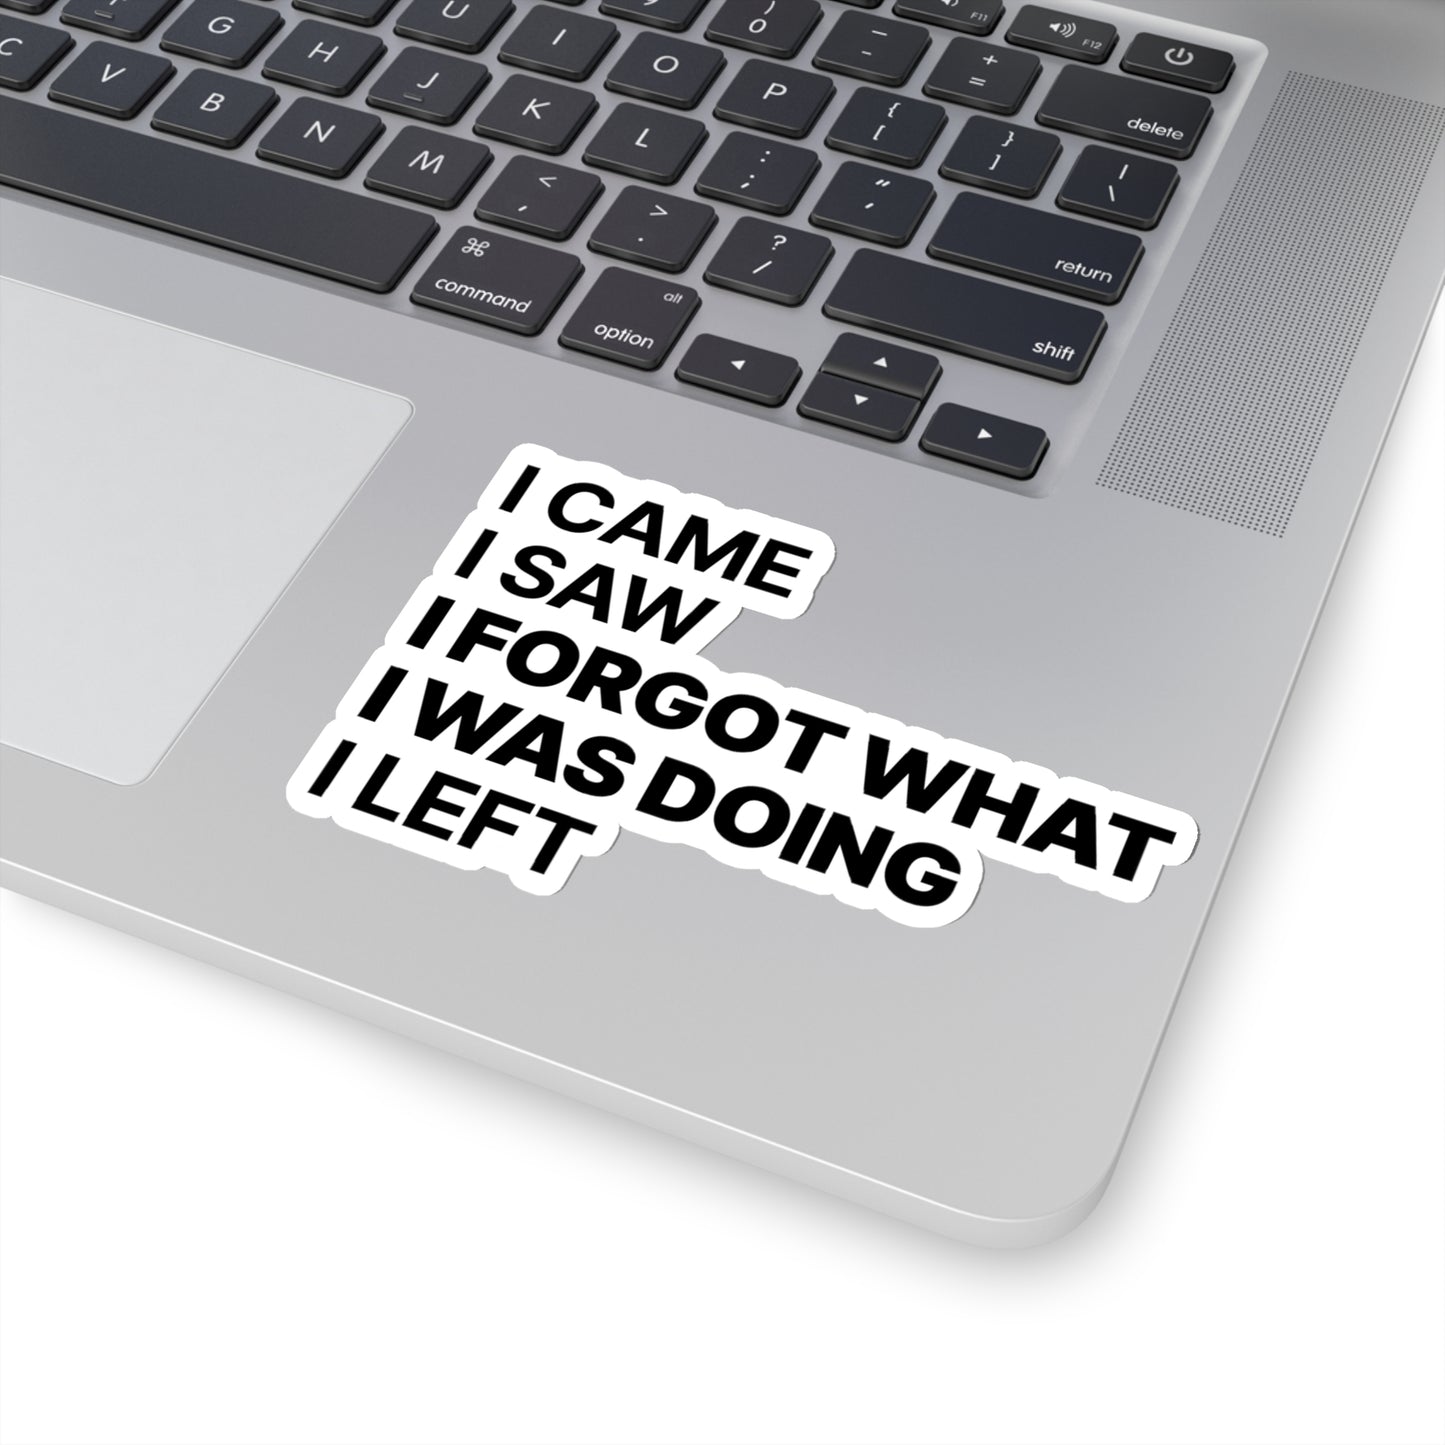 I Came. I Saw. I Forgot What I was Doing. I Left. Funny Forgetful Sticker, Sticker for Laptop, Phone, Hydroflask or Car